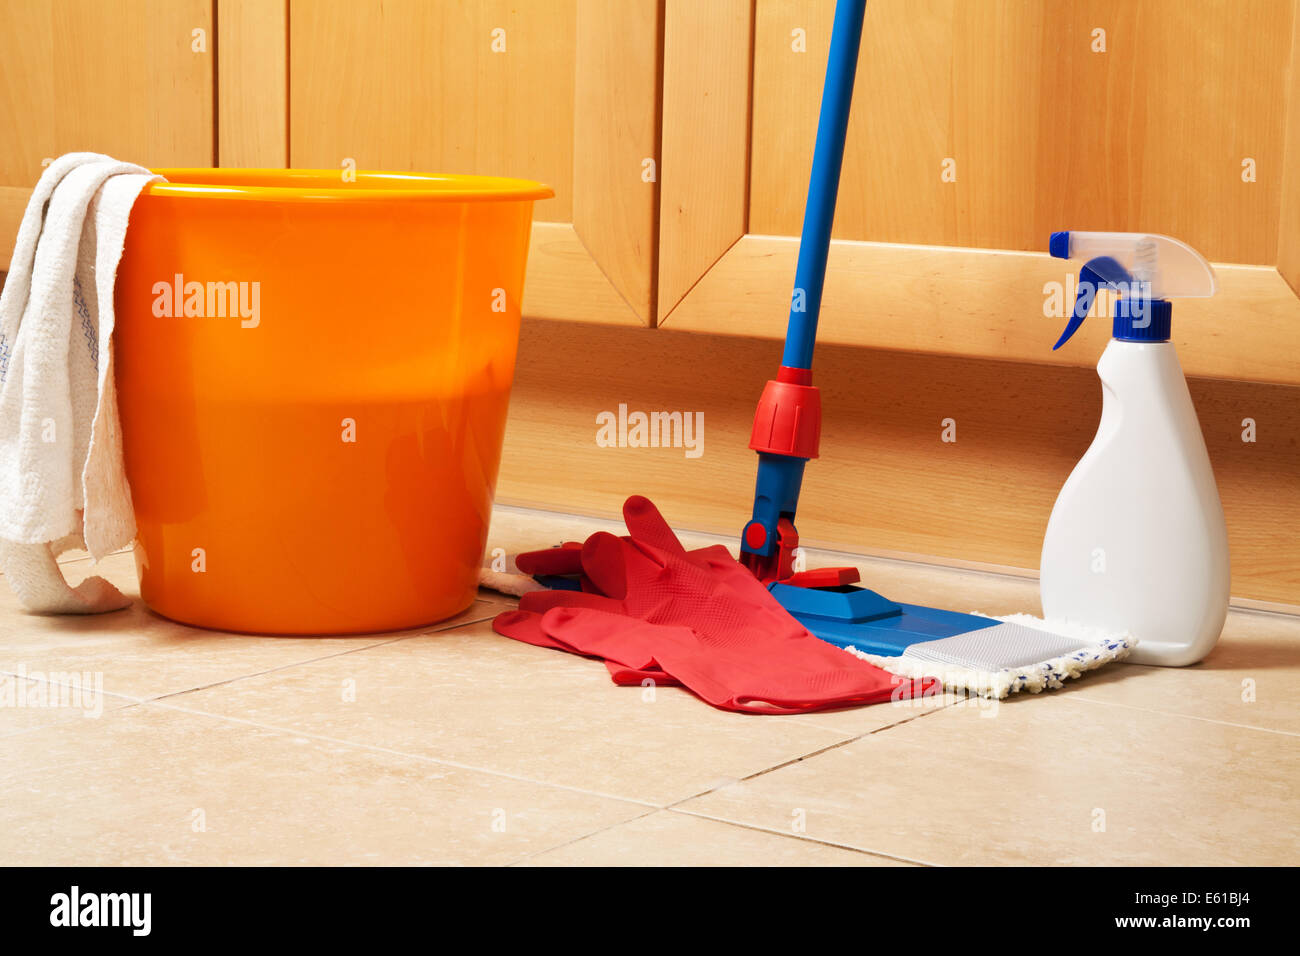 Bucket And Mop For Cleaning Stock Illustration - Download Image